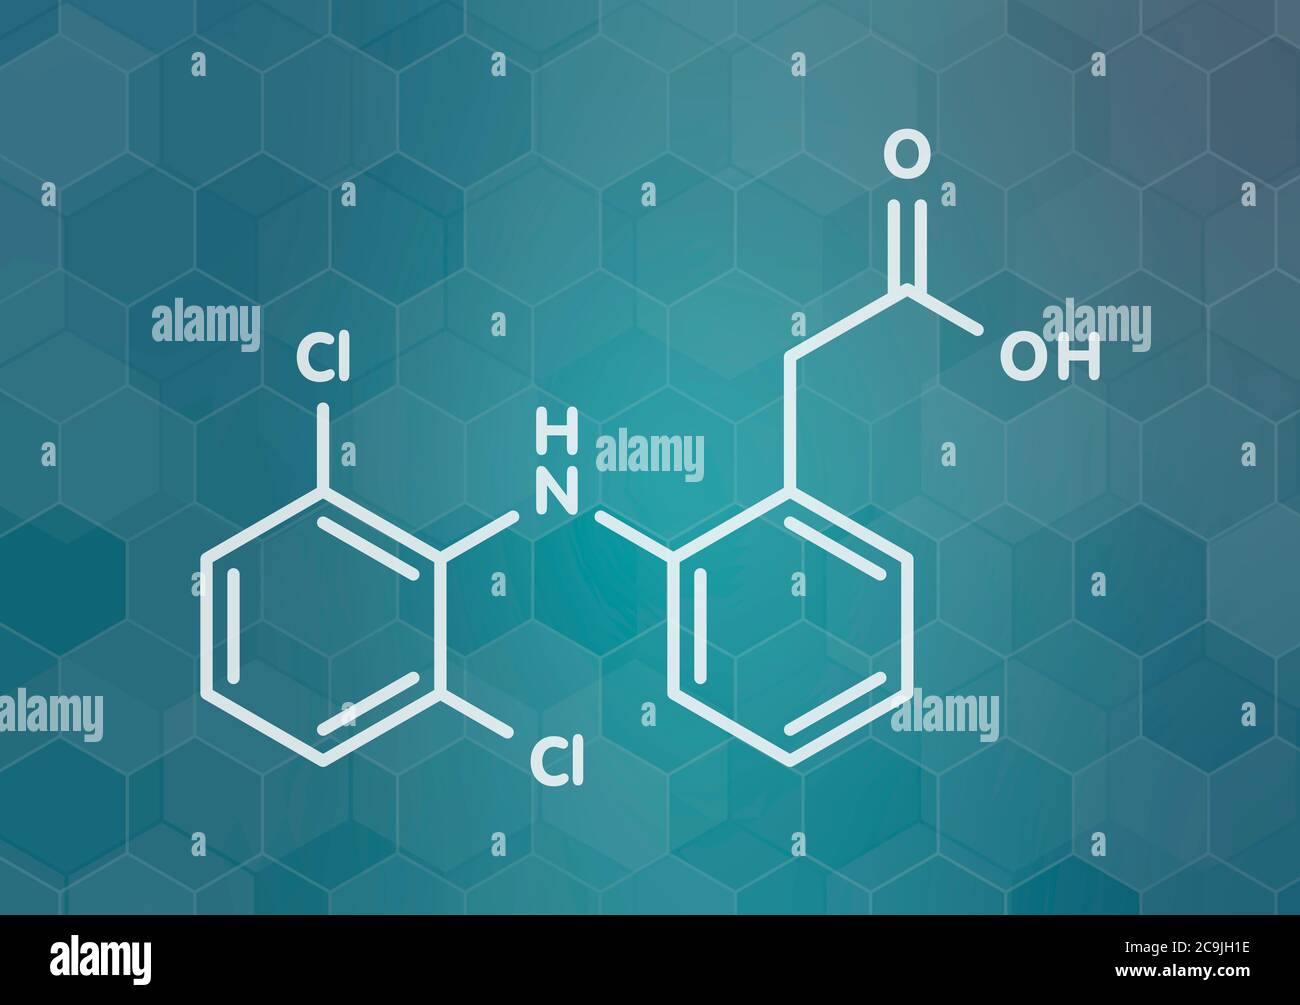 Diclofenac pain and inflammation drug (NSAID) molecule. White skeletal formula on dark teal gradient background with hexagonal pattern. Stock Photo